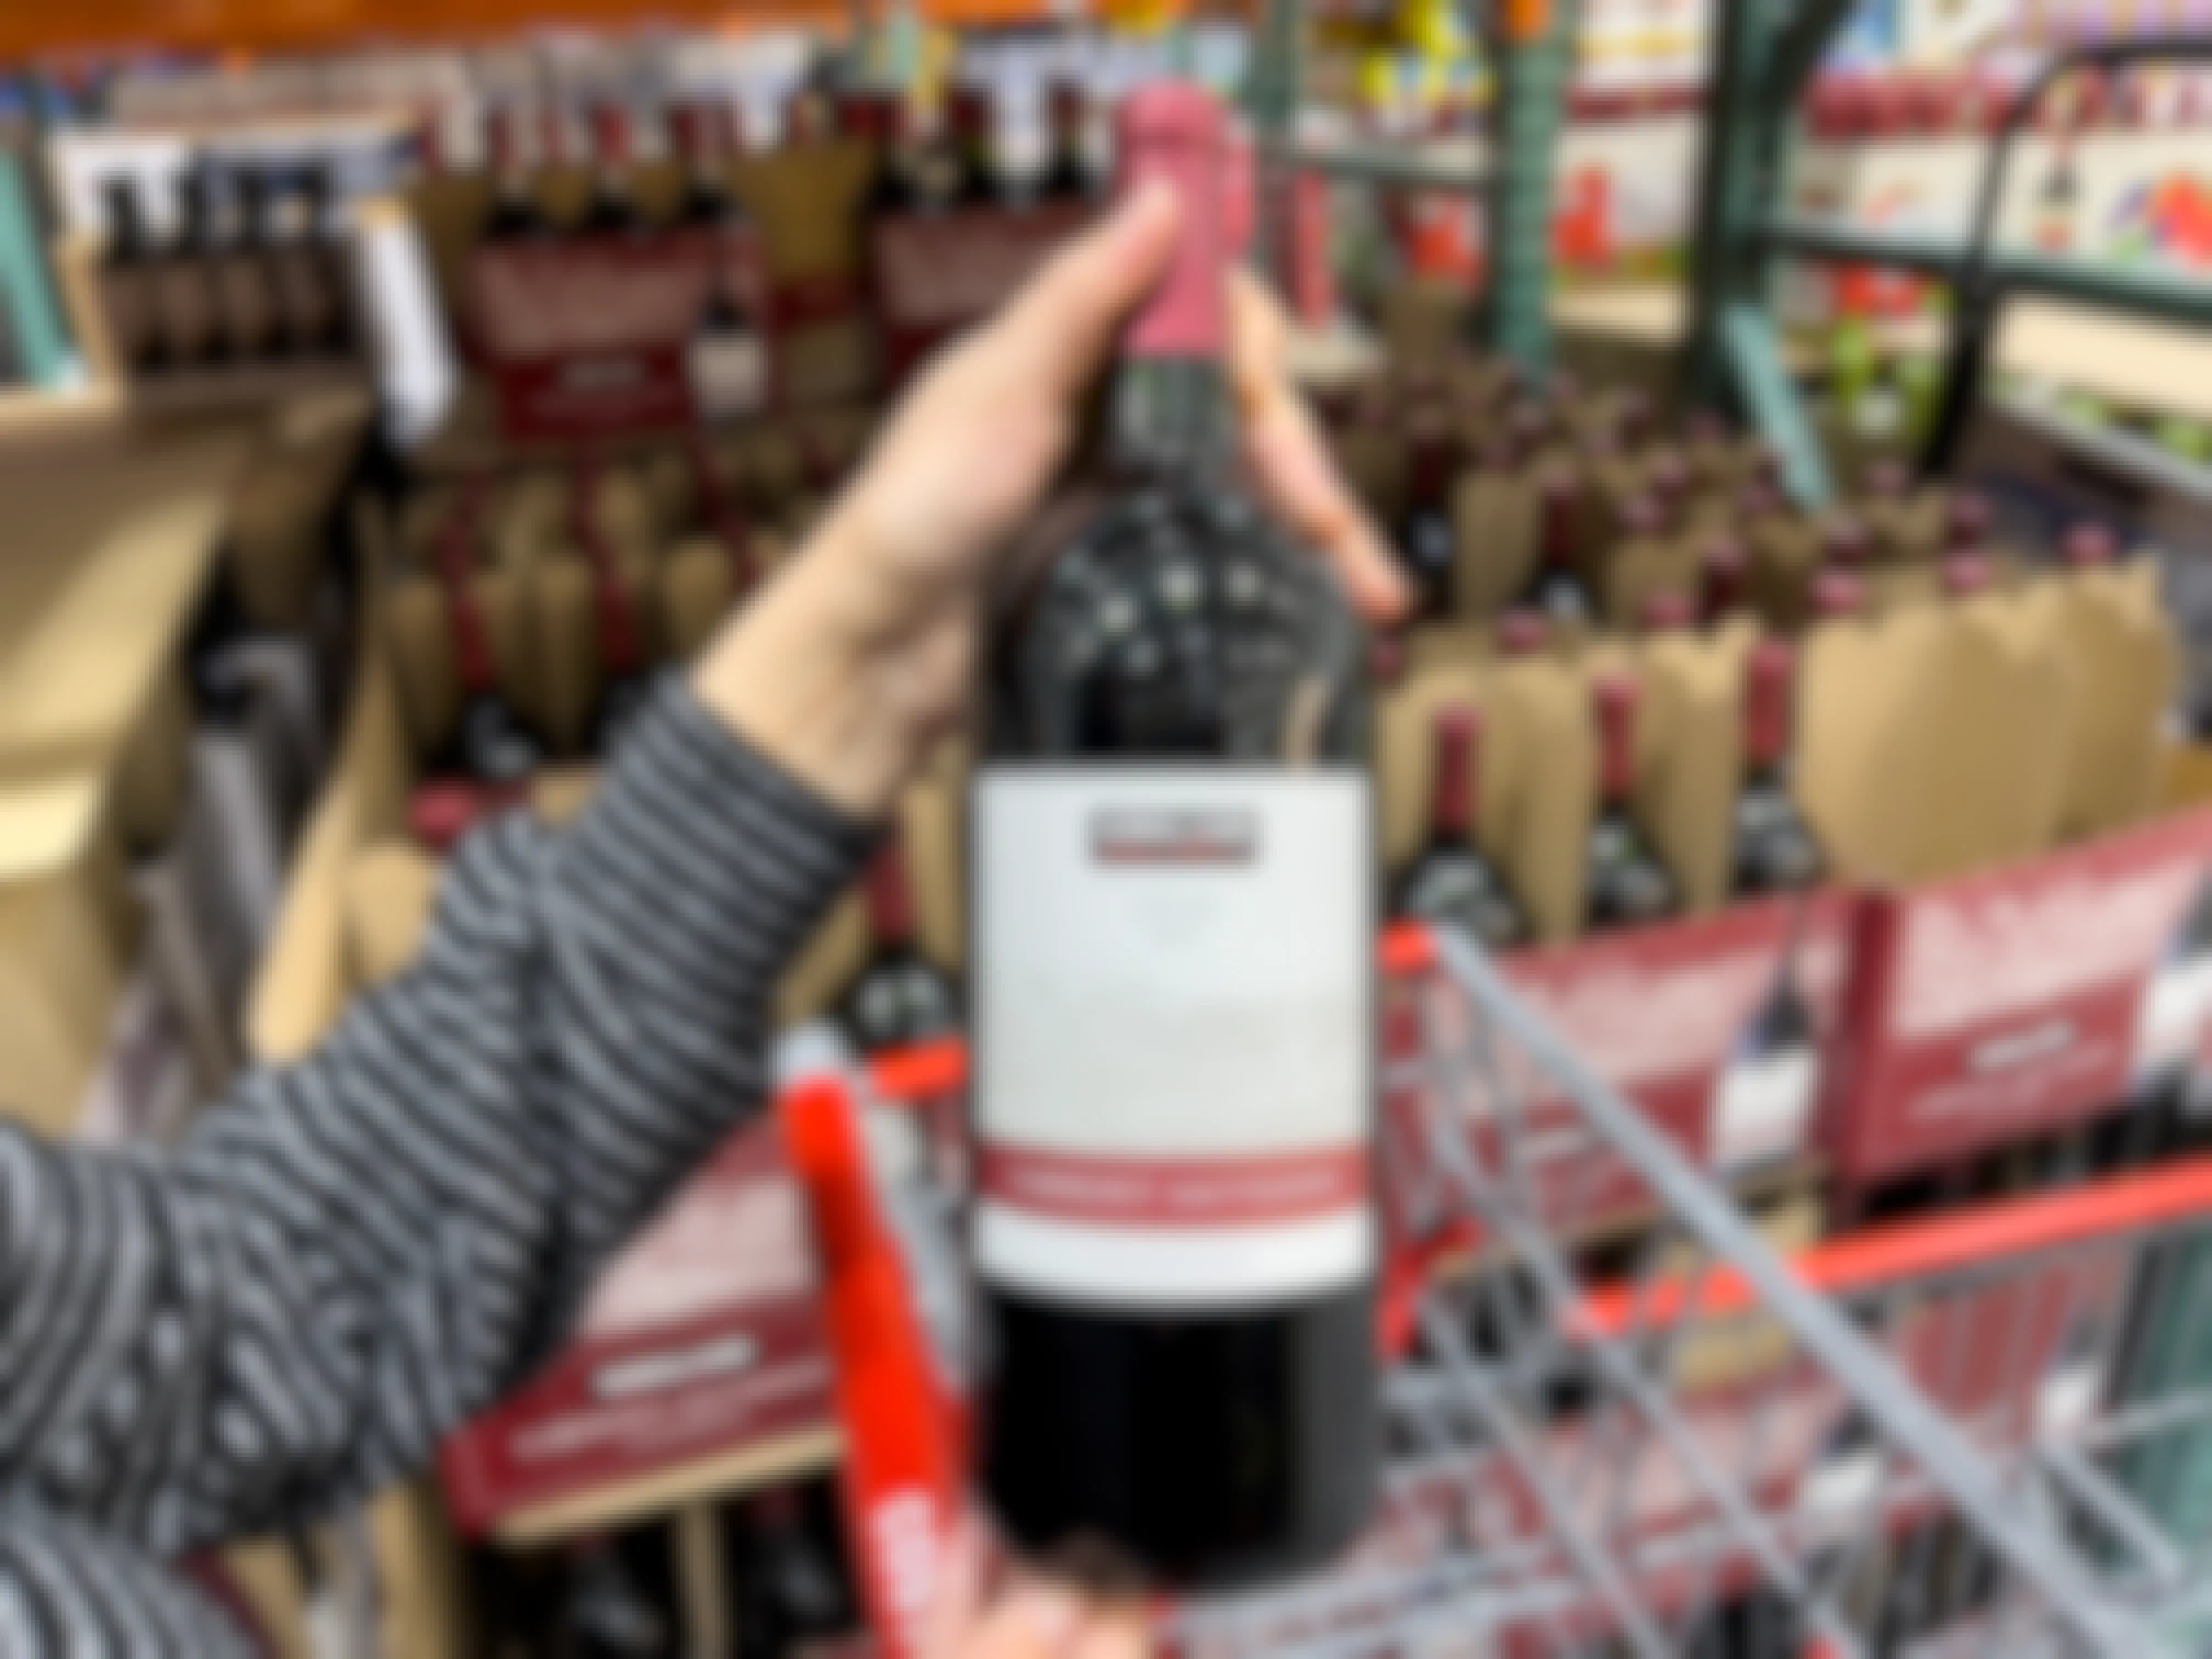 A person holding a bottle of Kirkland brand Cabernet wine over a shopping cart.